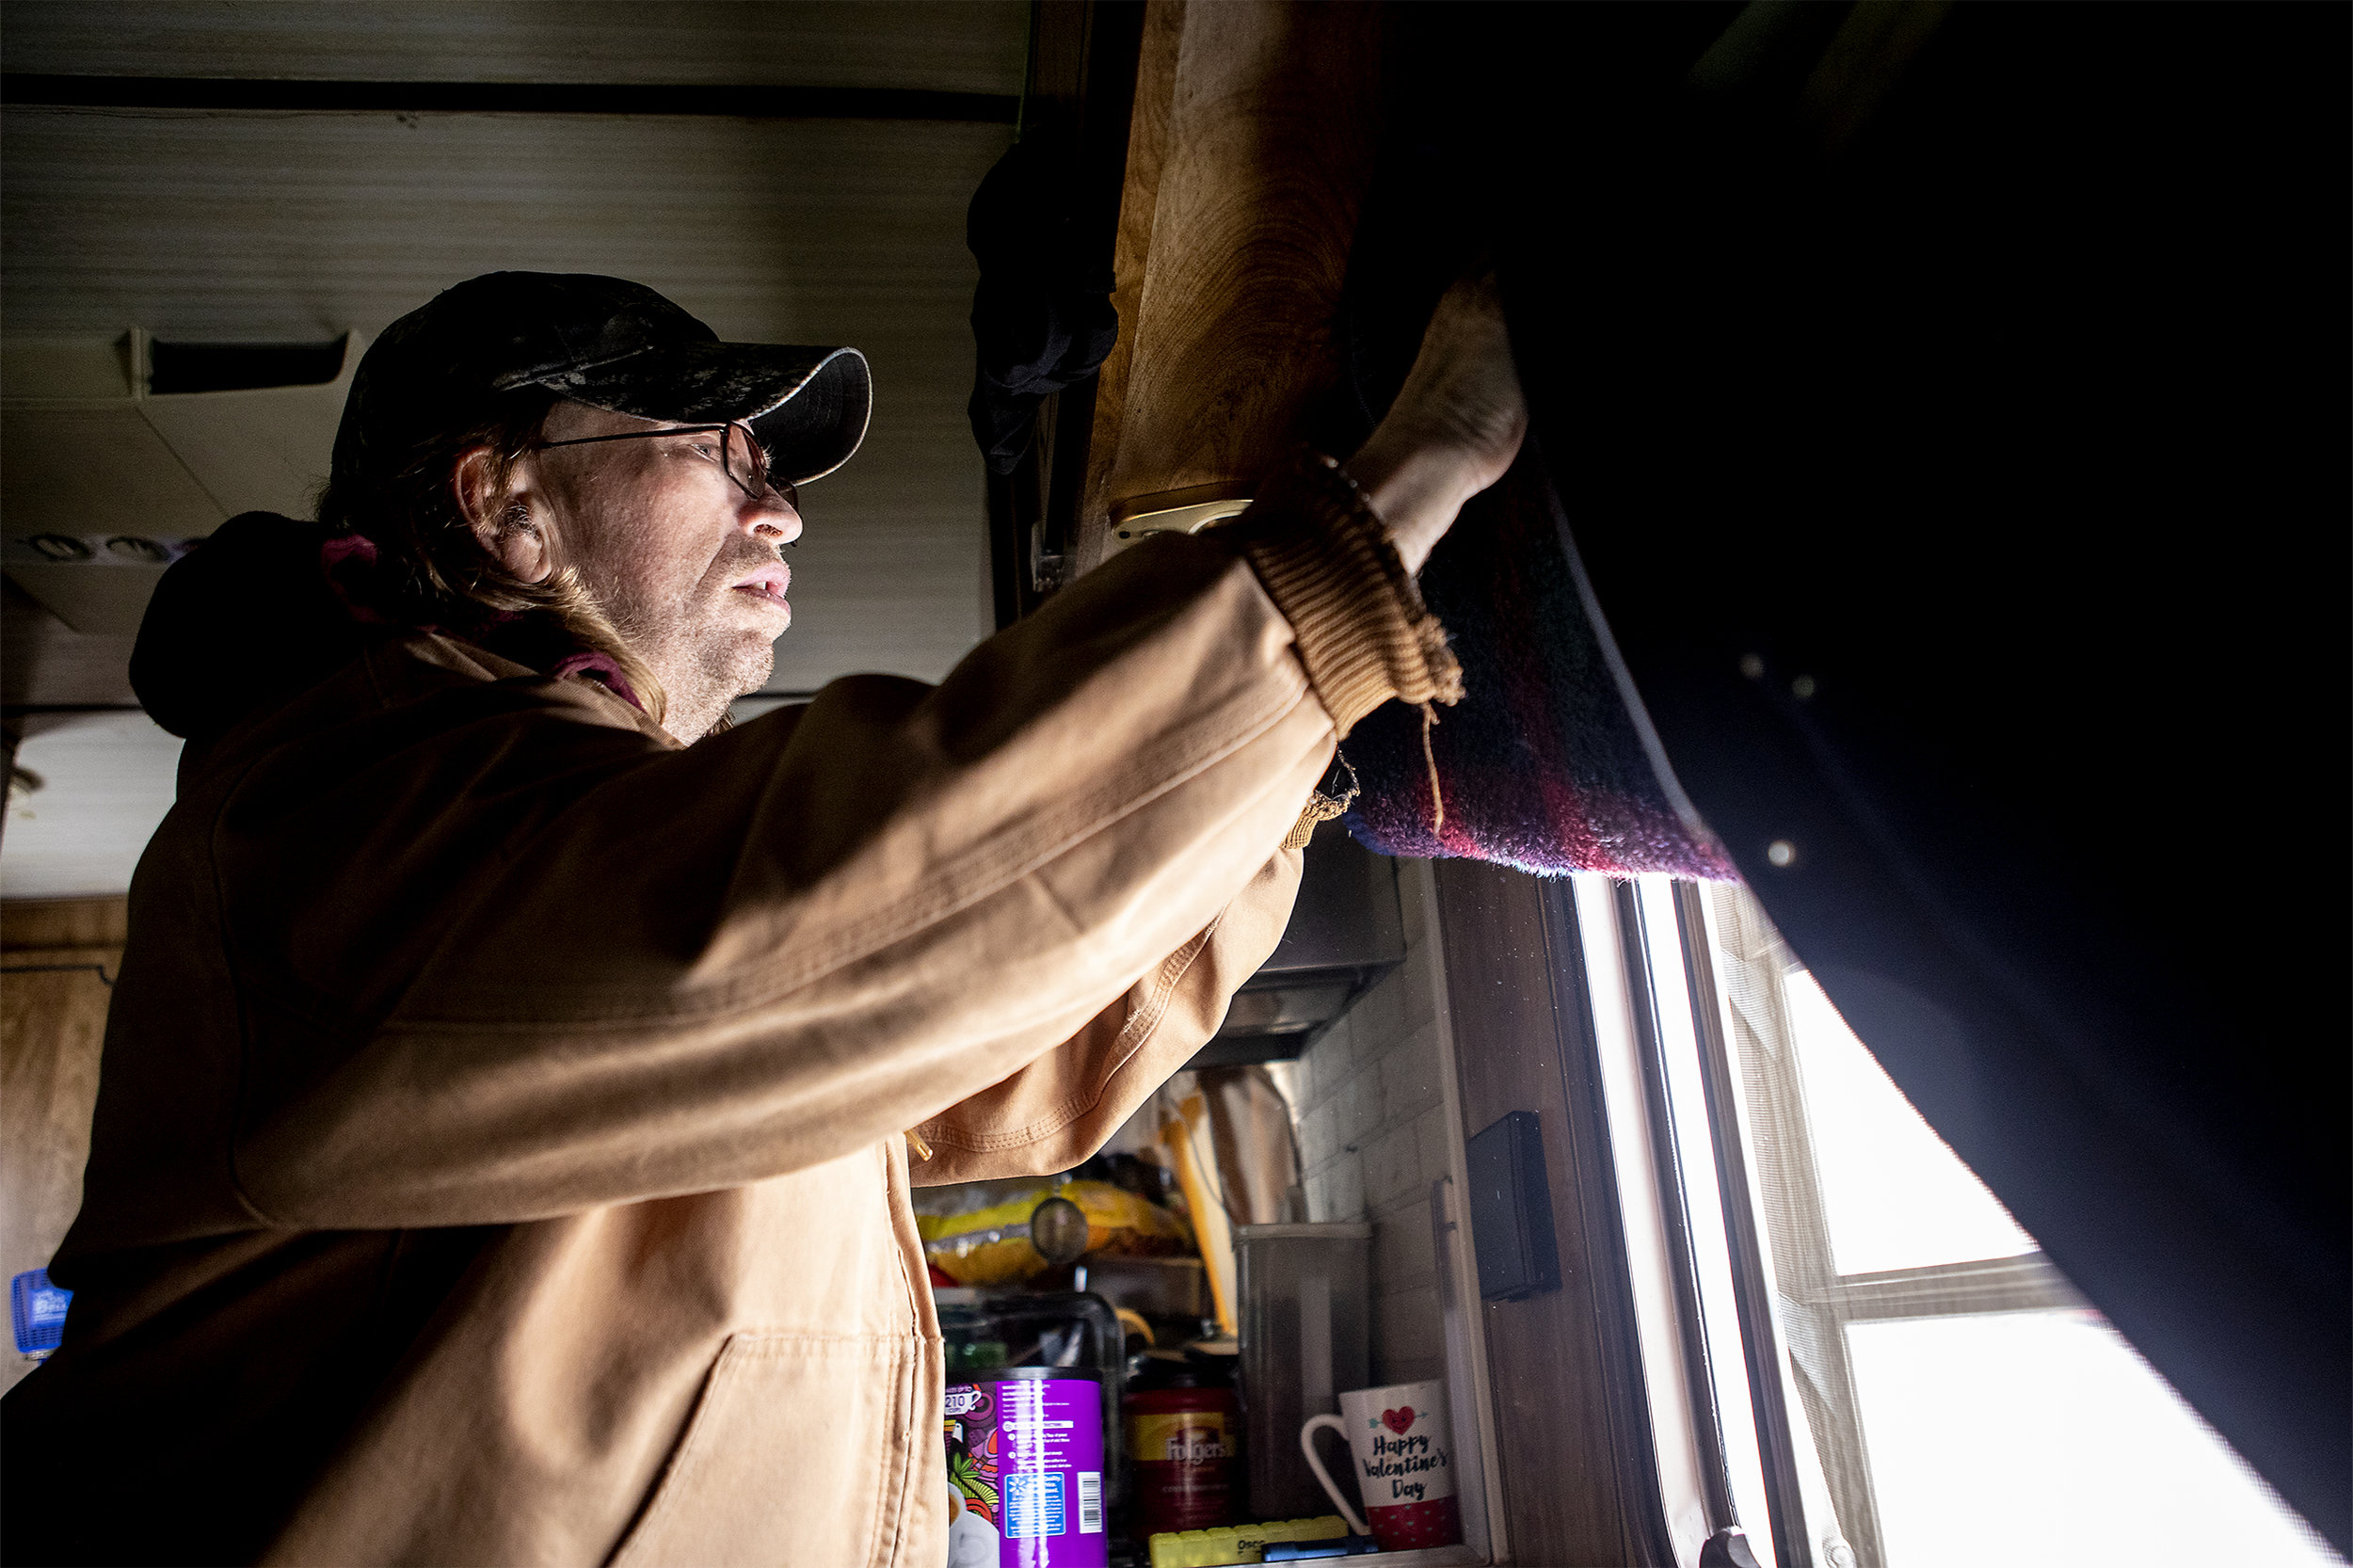  Jeff lifts the curtains of their home. During the recent cold that hit Gillette they ended up with ice on their windows and inch thick. The family relies one a heater and propane tanks to keep them and the mobile home warm during the winter. 